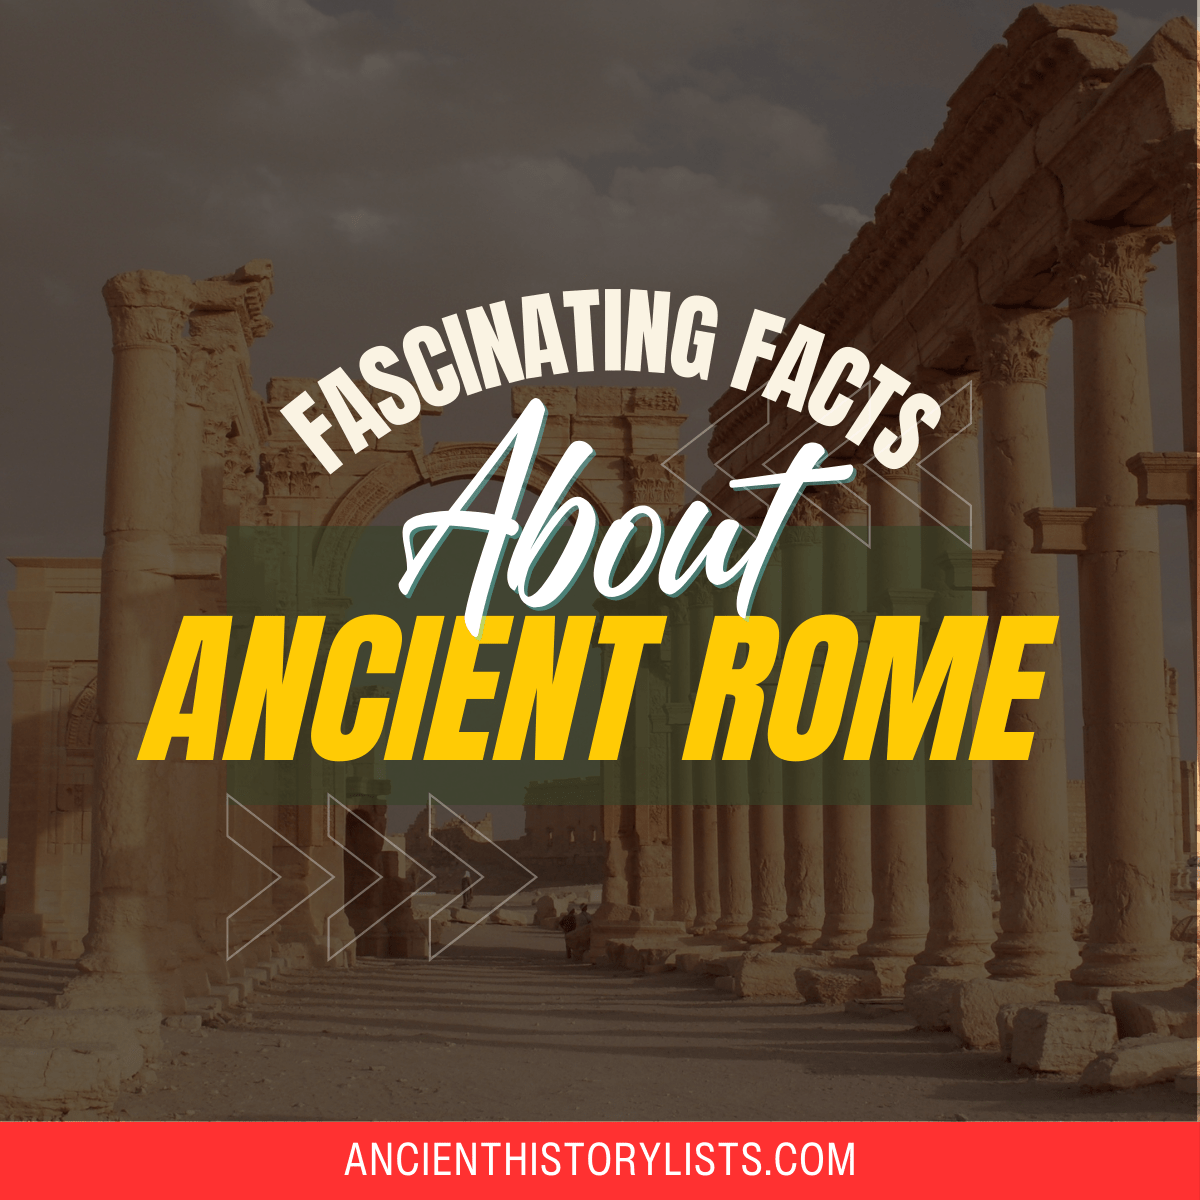 Amazing Facts about Ancient Rome